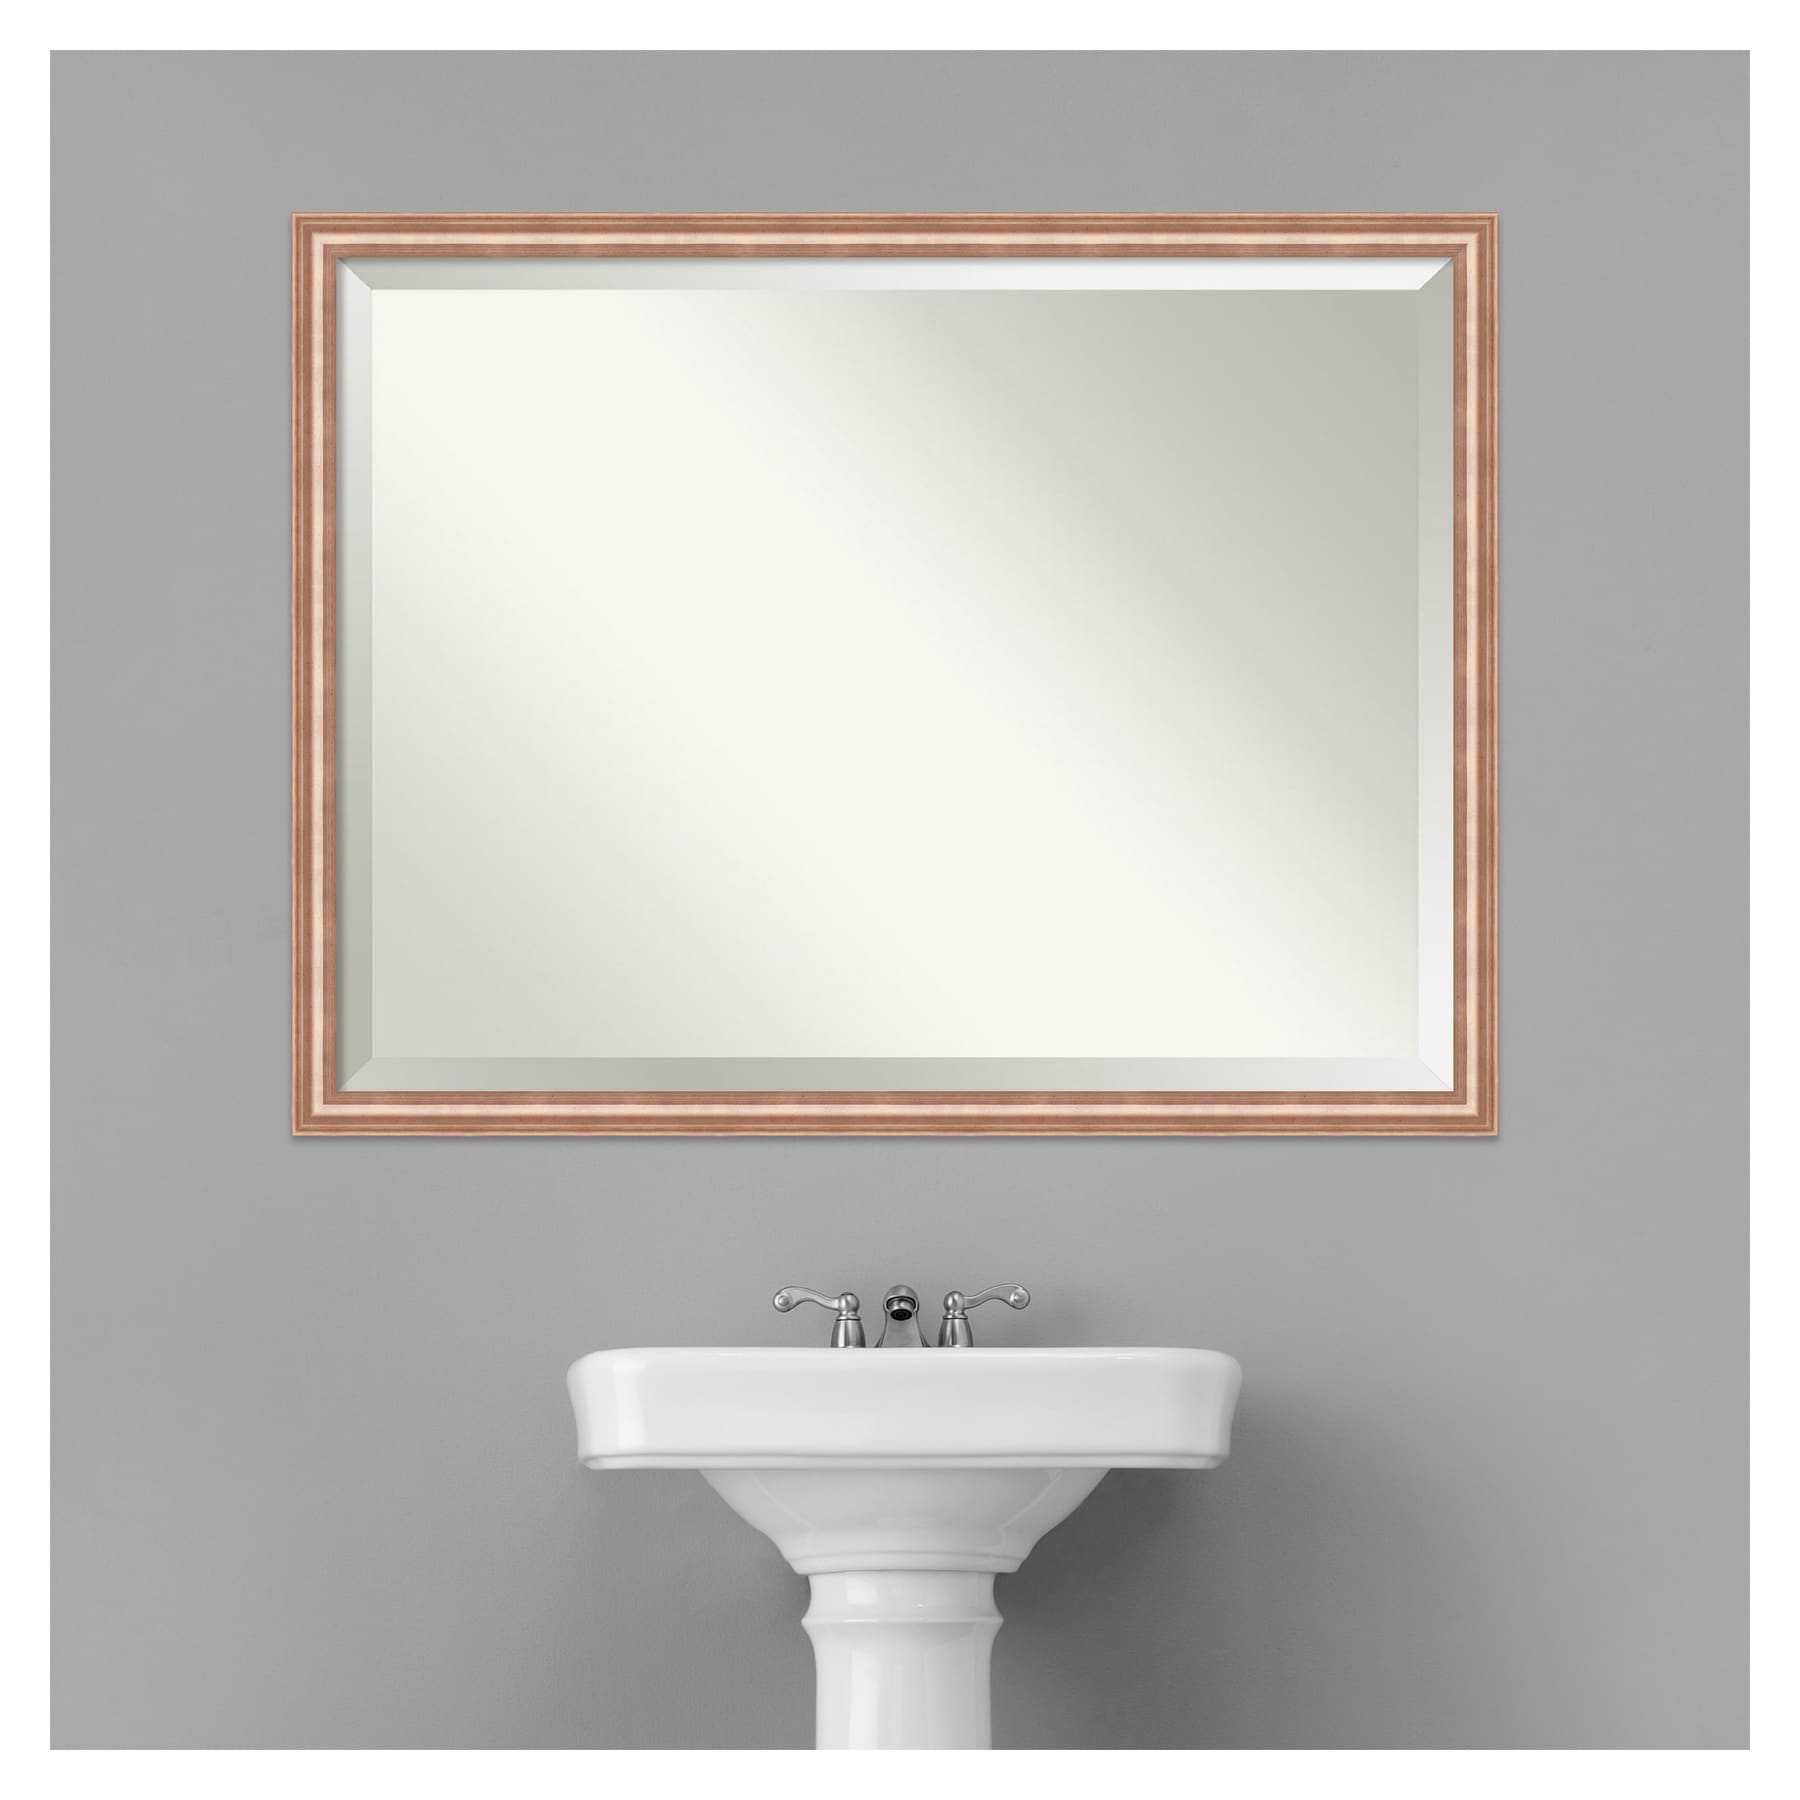 Amanti Art Harmony Rose Gold Frame 42.62-in W x 32.62-in H Satin Gold ...